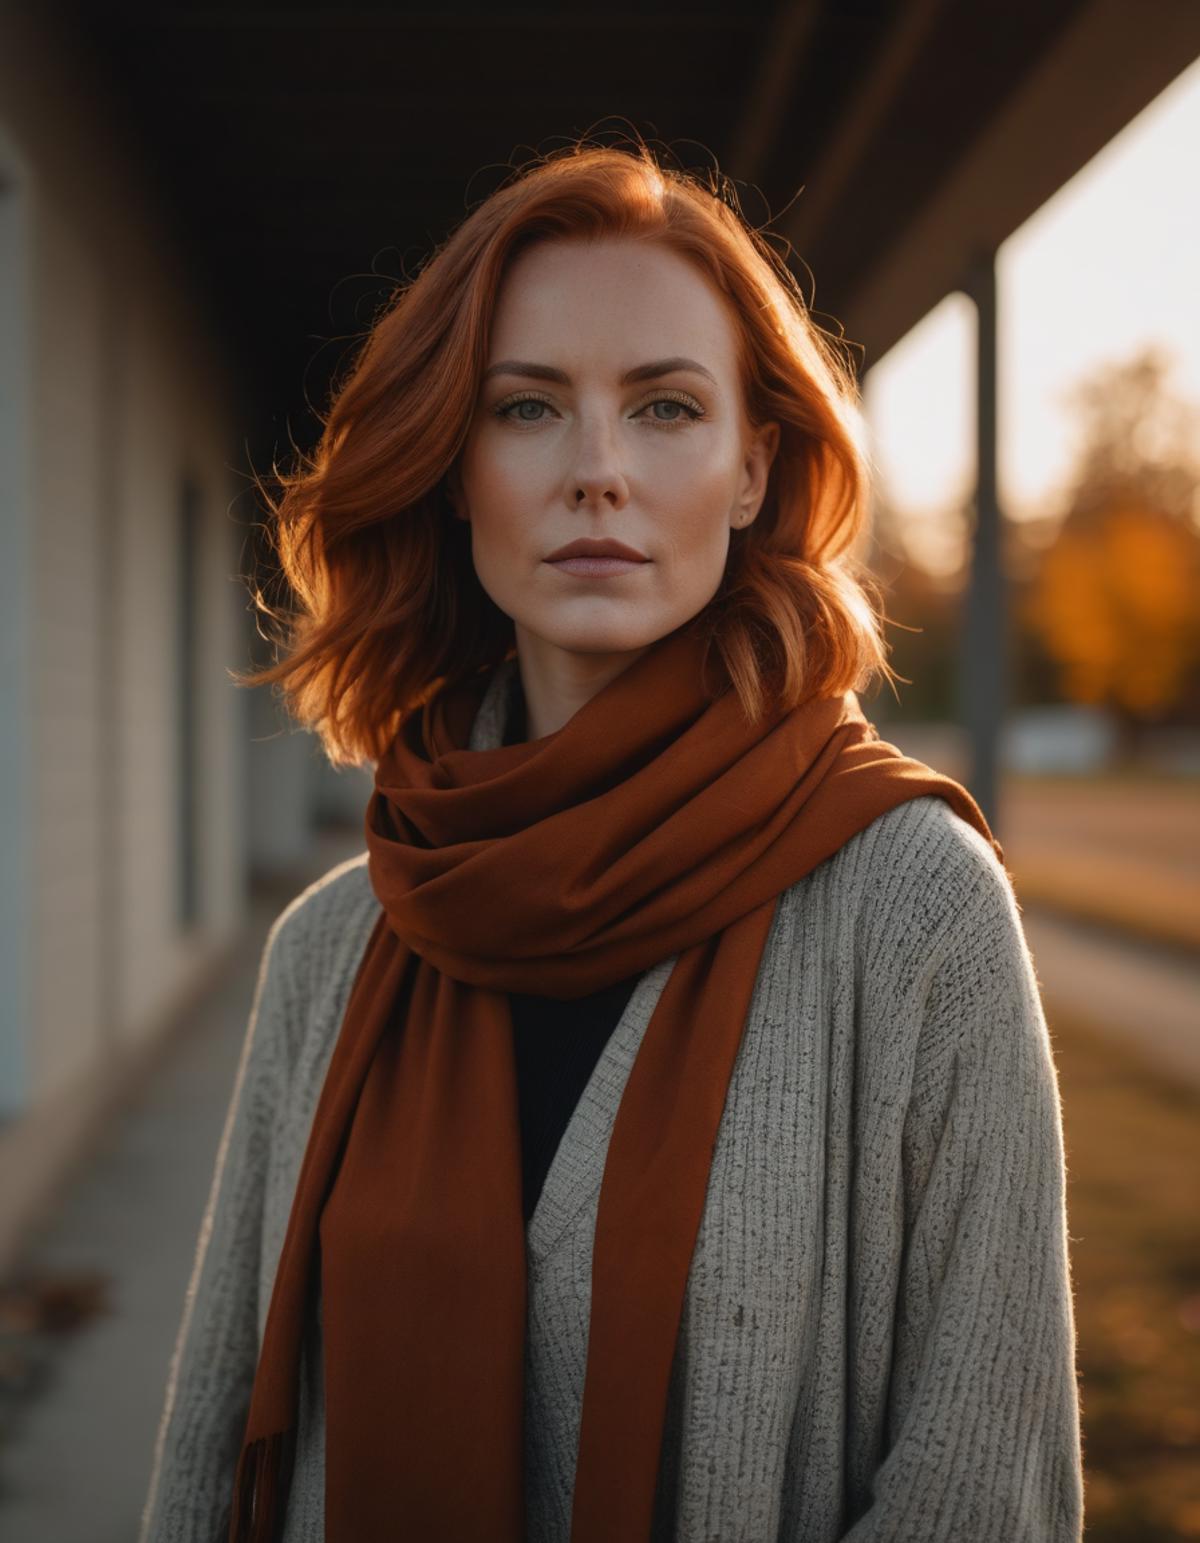 A woman with long red hair wearing a brown scarf and a gray sweater.